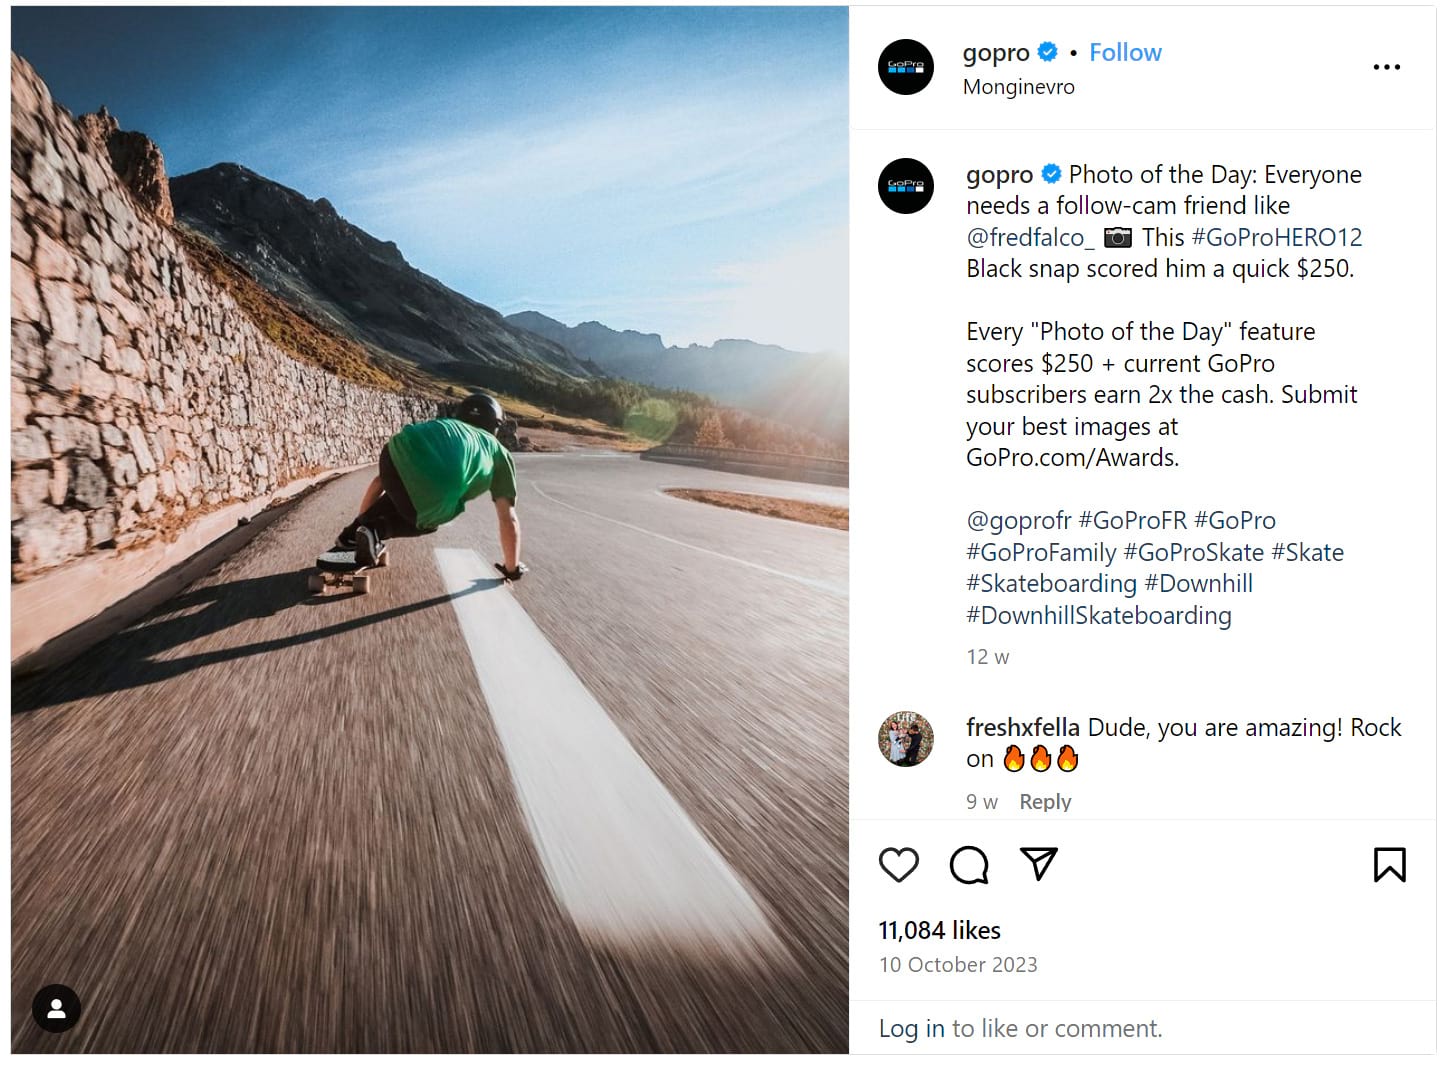 GoPro's station  connected  Instagram with user-generated image